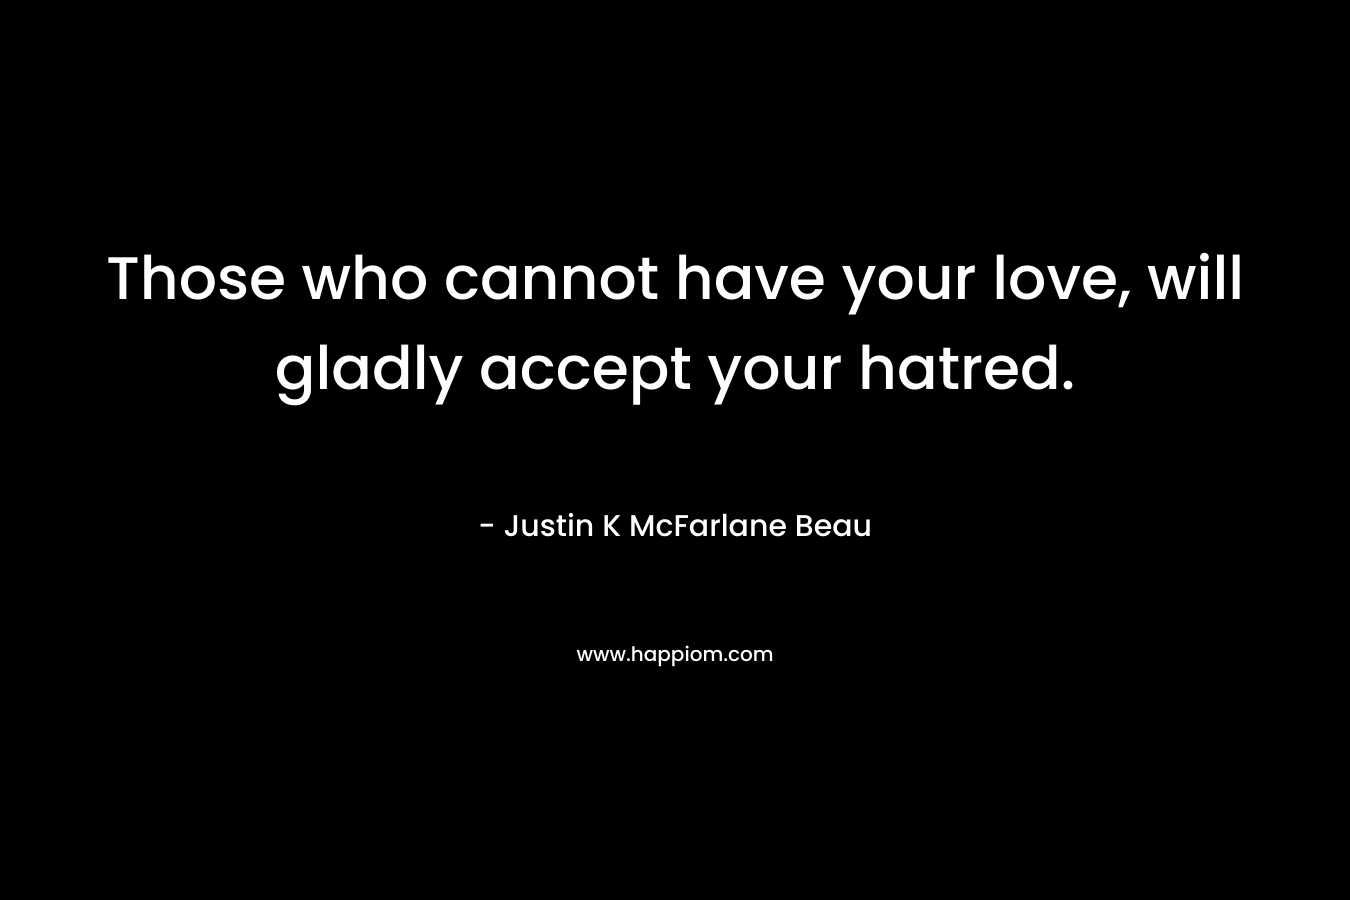 Those who cannot have your love, will gladly accept your hatred.